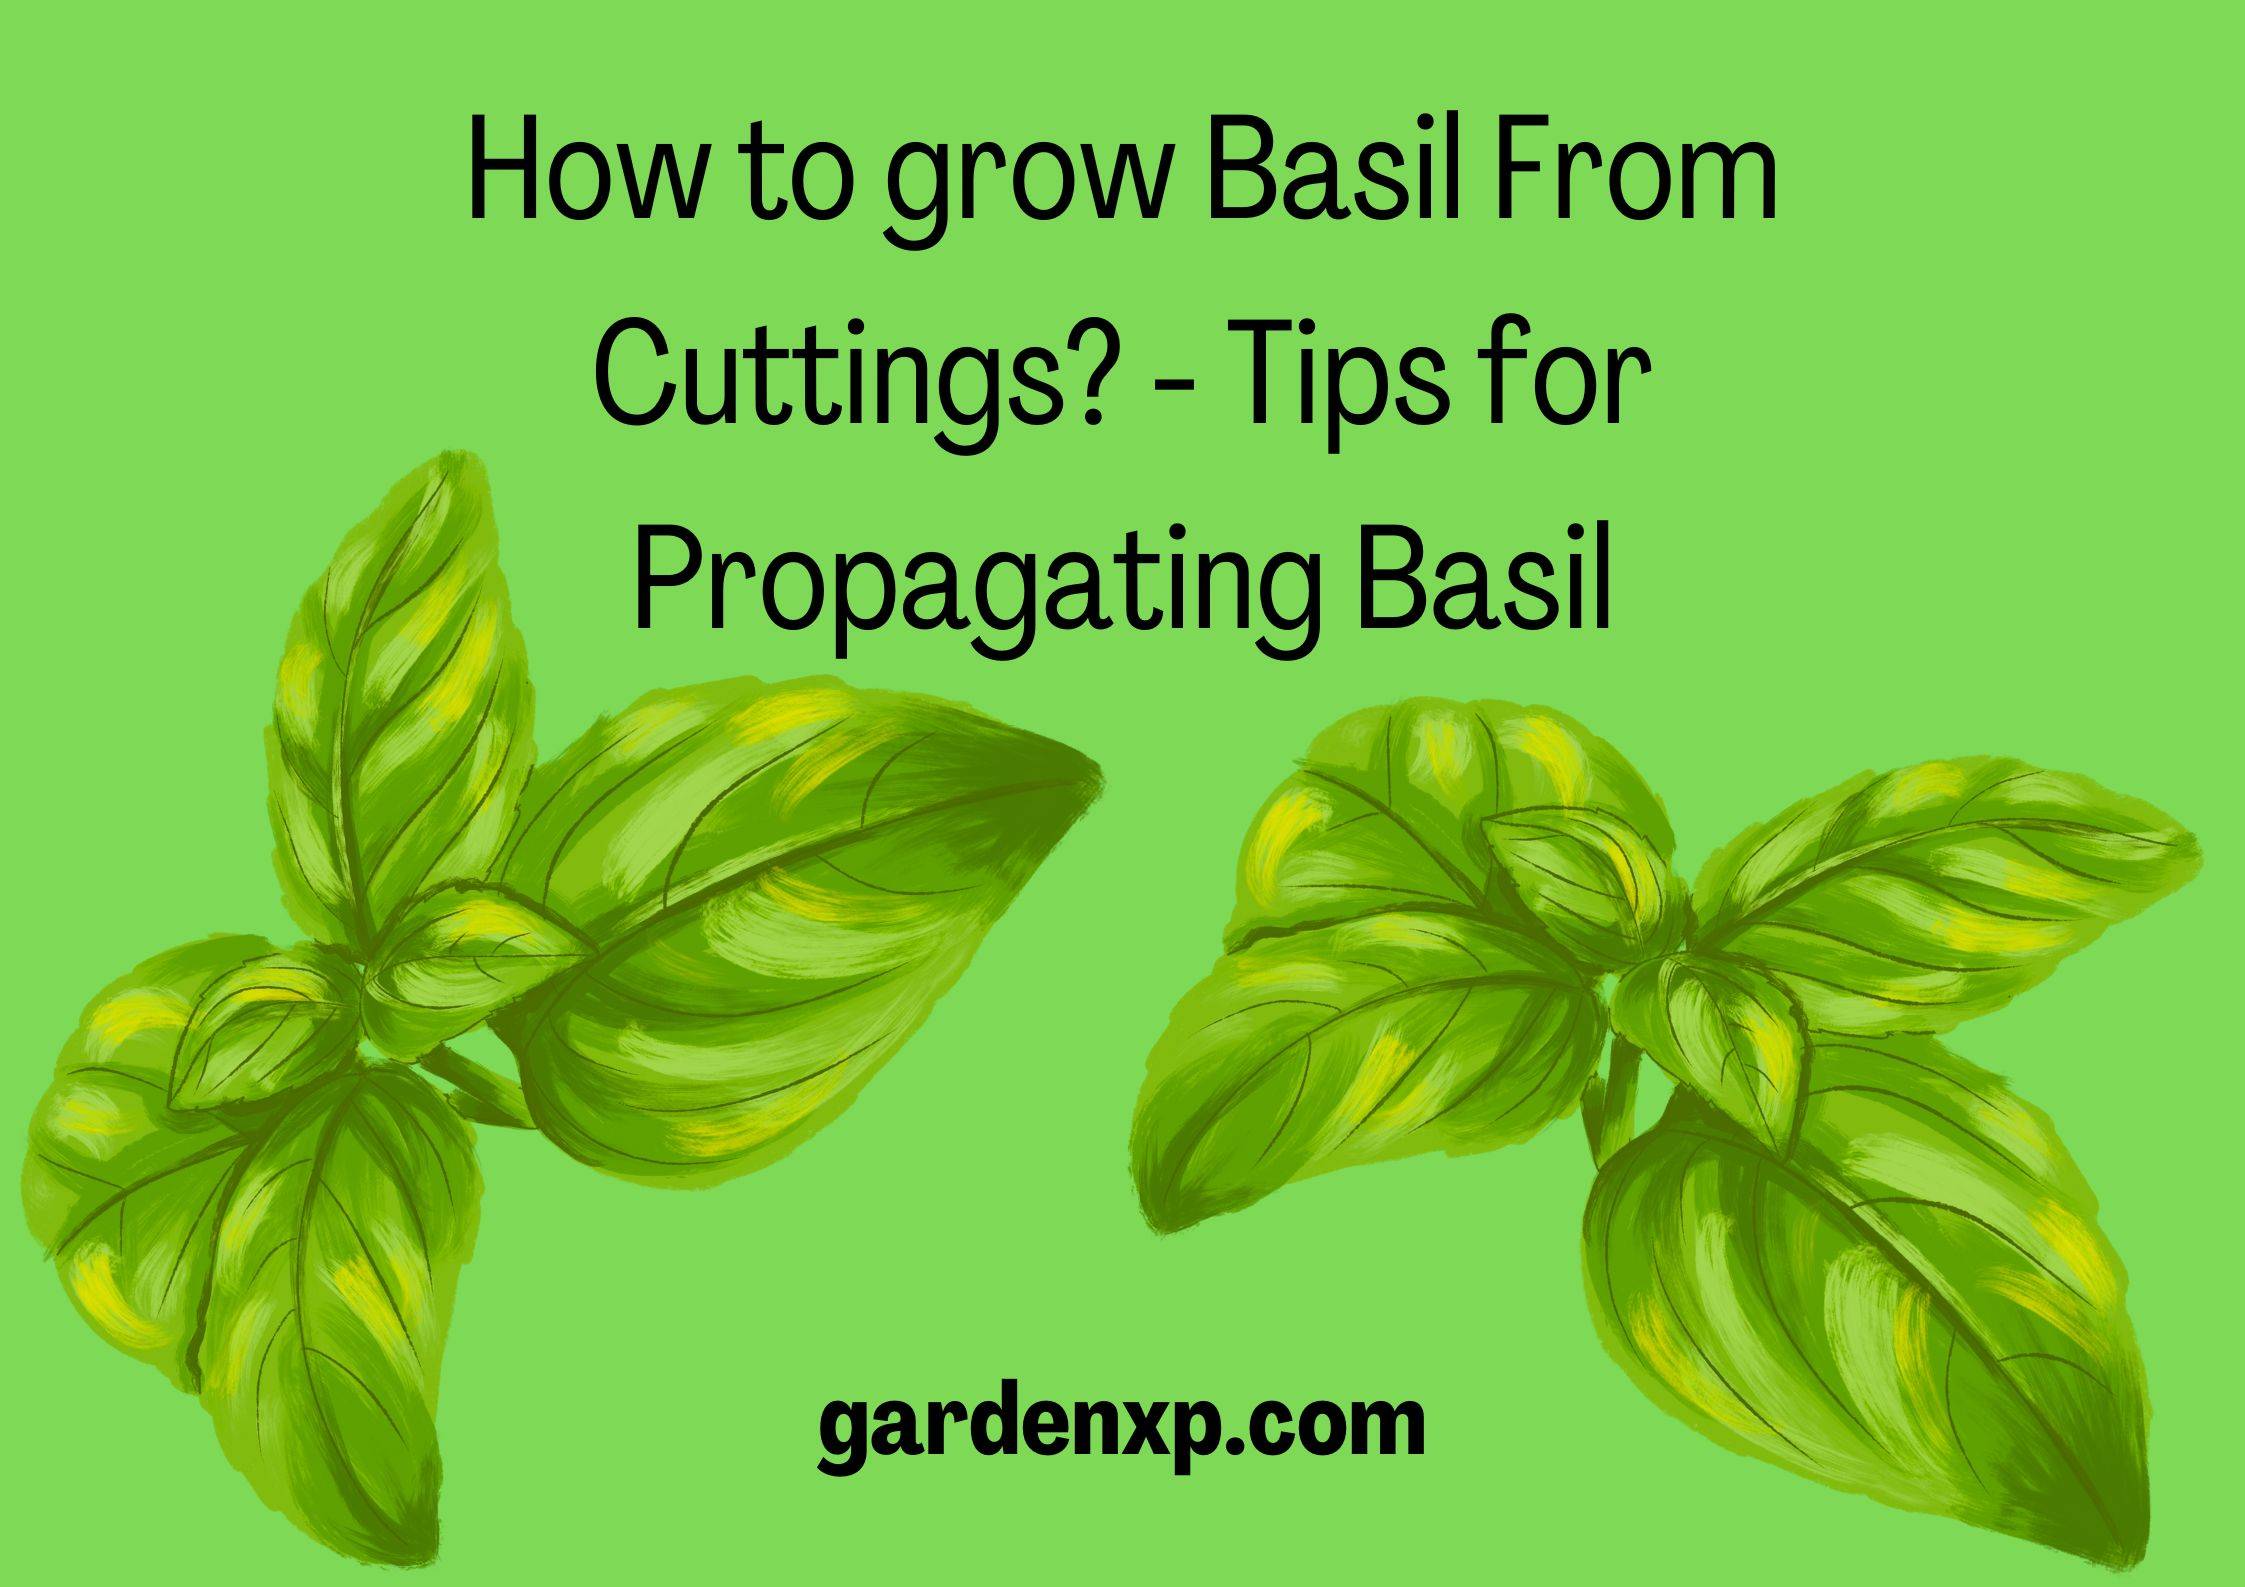 How to grow Basil From Cuttings? - Tips for Propagating Basil